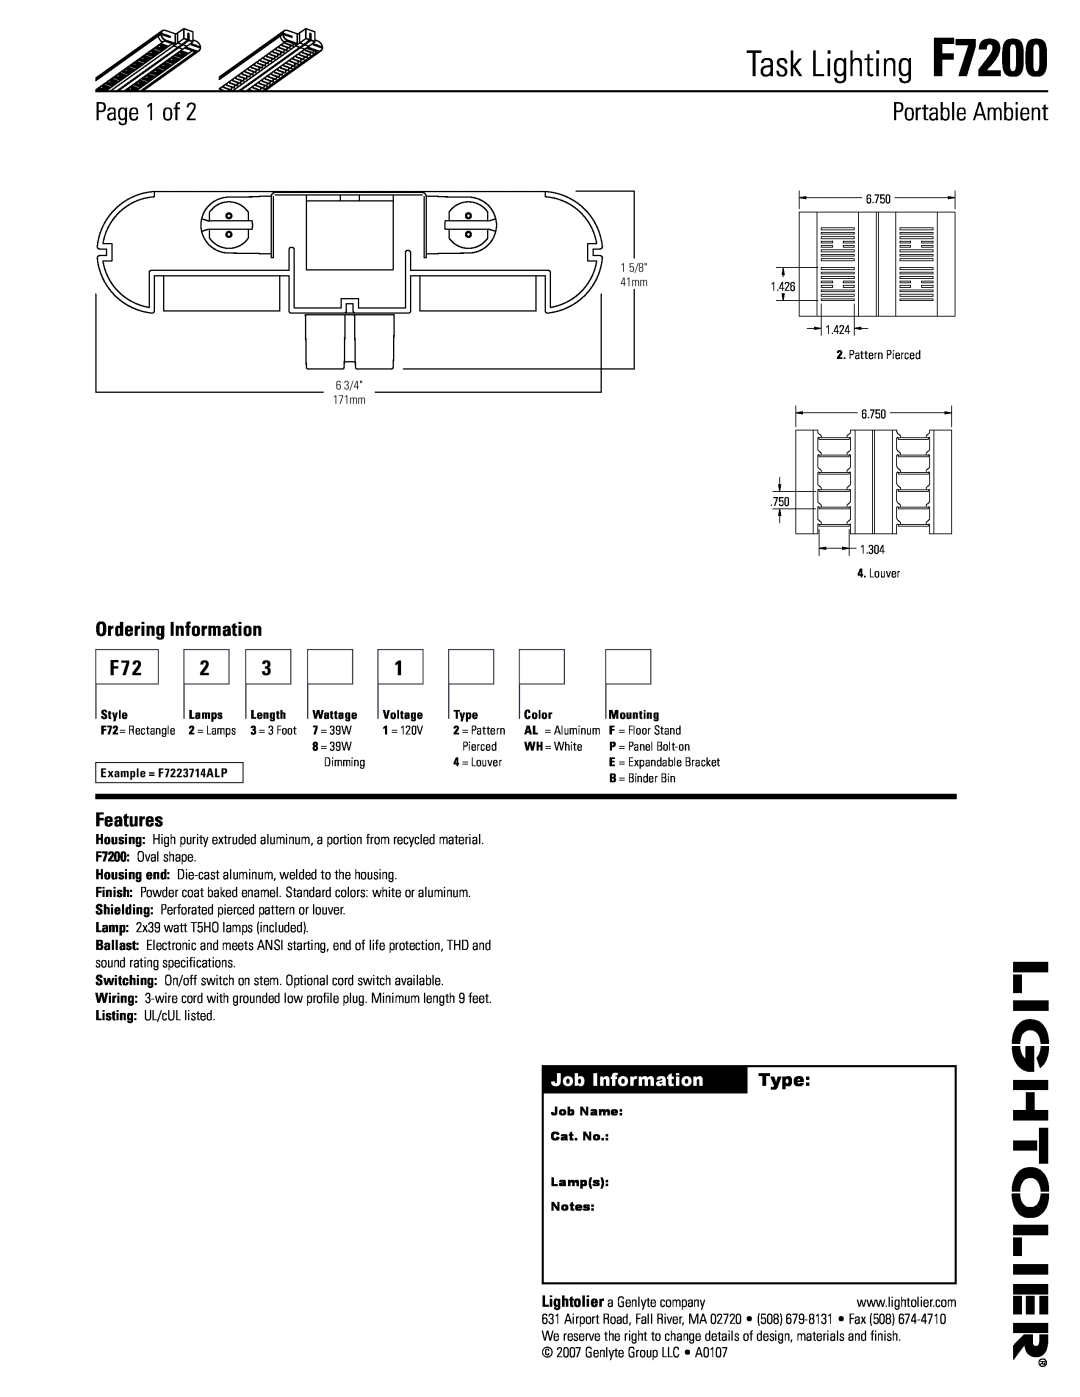 Lightolier specifications Page of, Portable Ambient, Job Information, Type, Task Lighting F7200, Ordering Information 